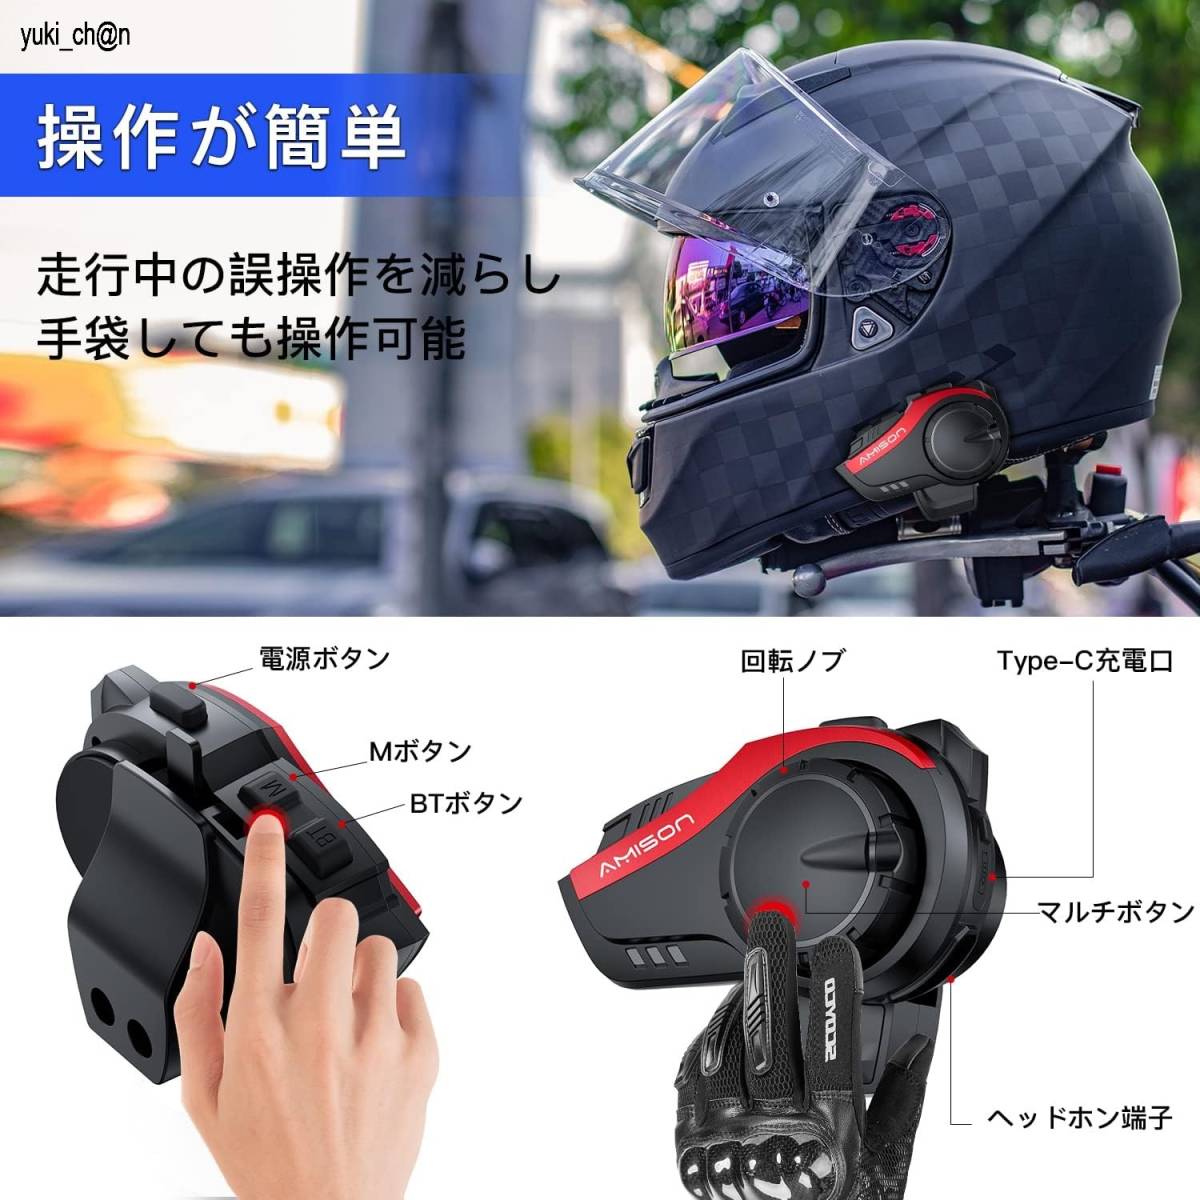  bike in cam red 10 person same time telephone call maximum telephone call distance 2000m Bluetooth5.0 transceiver bike continuation 28H hour telephone call IP67 waterproof 